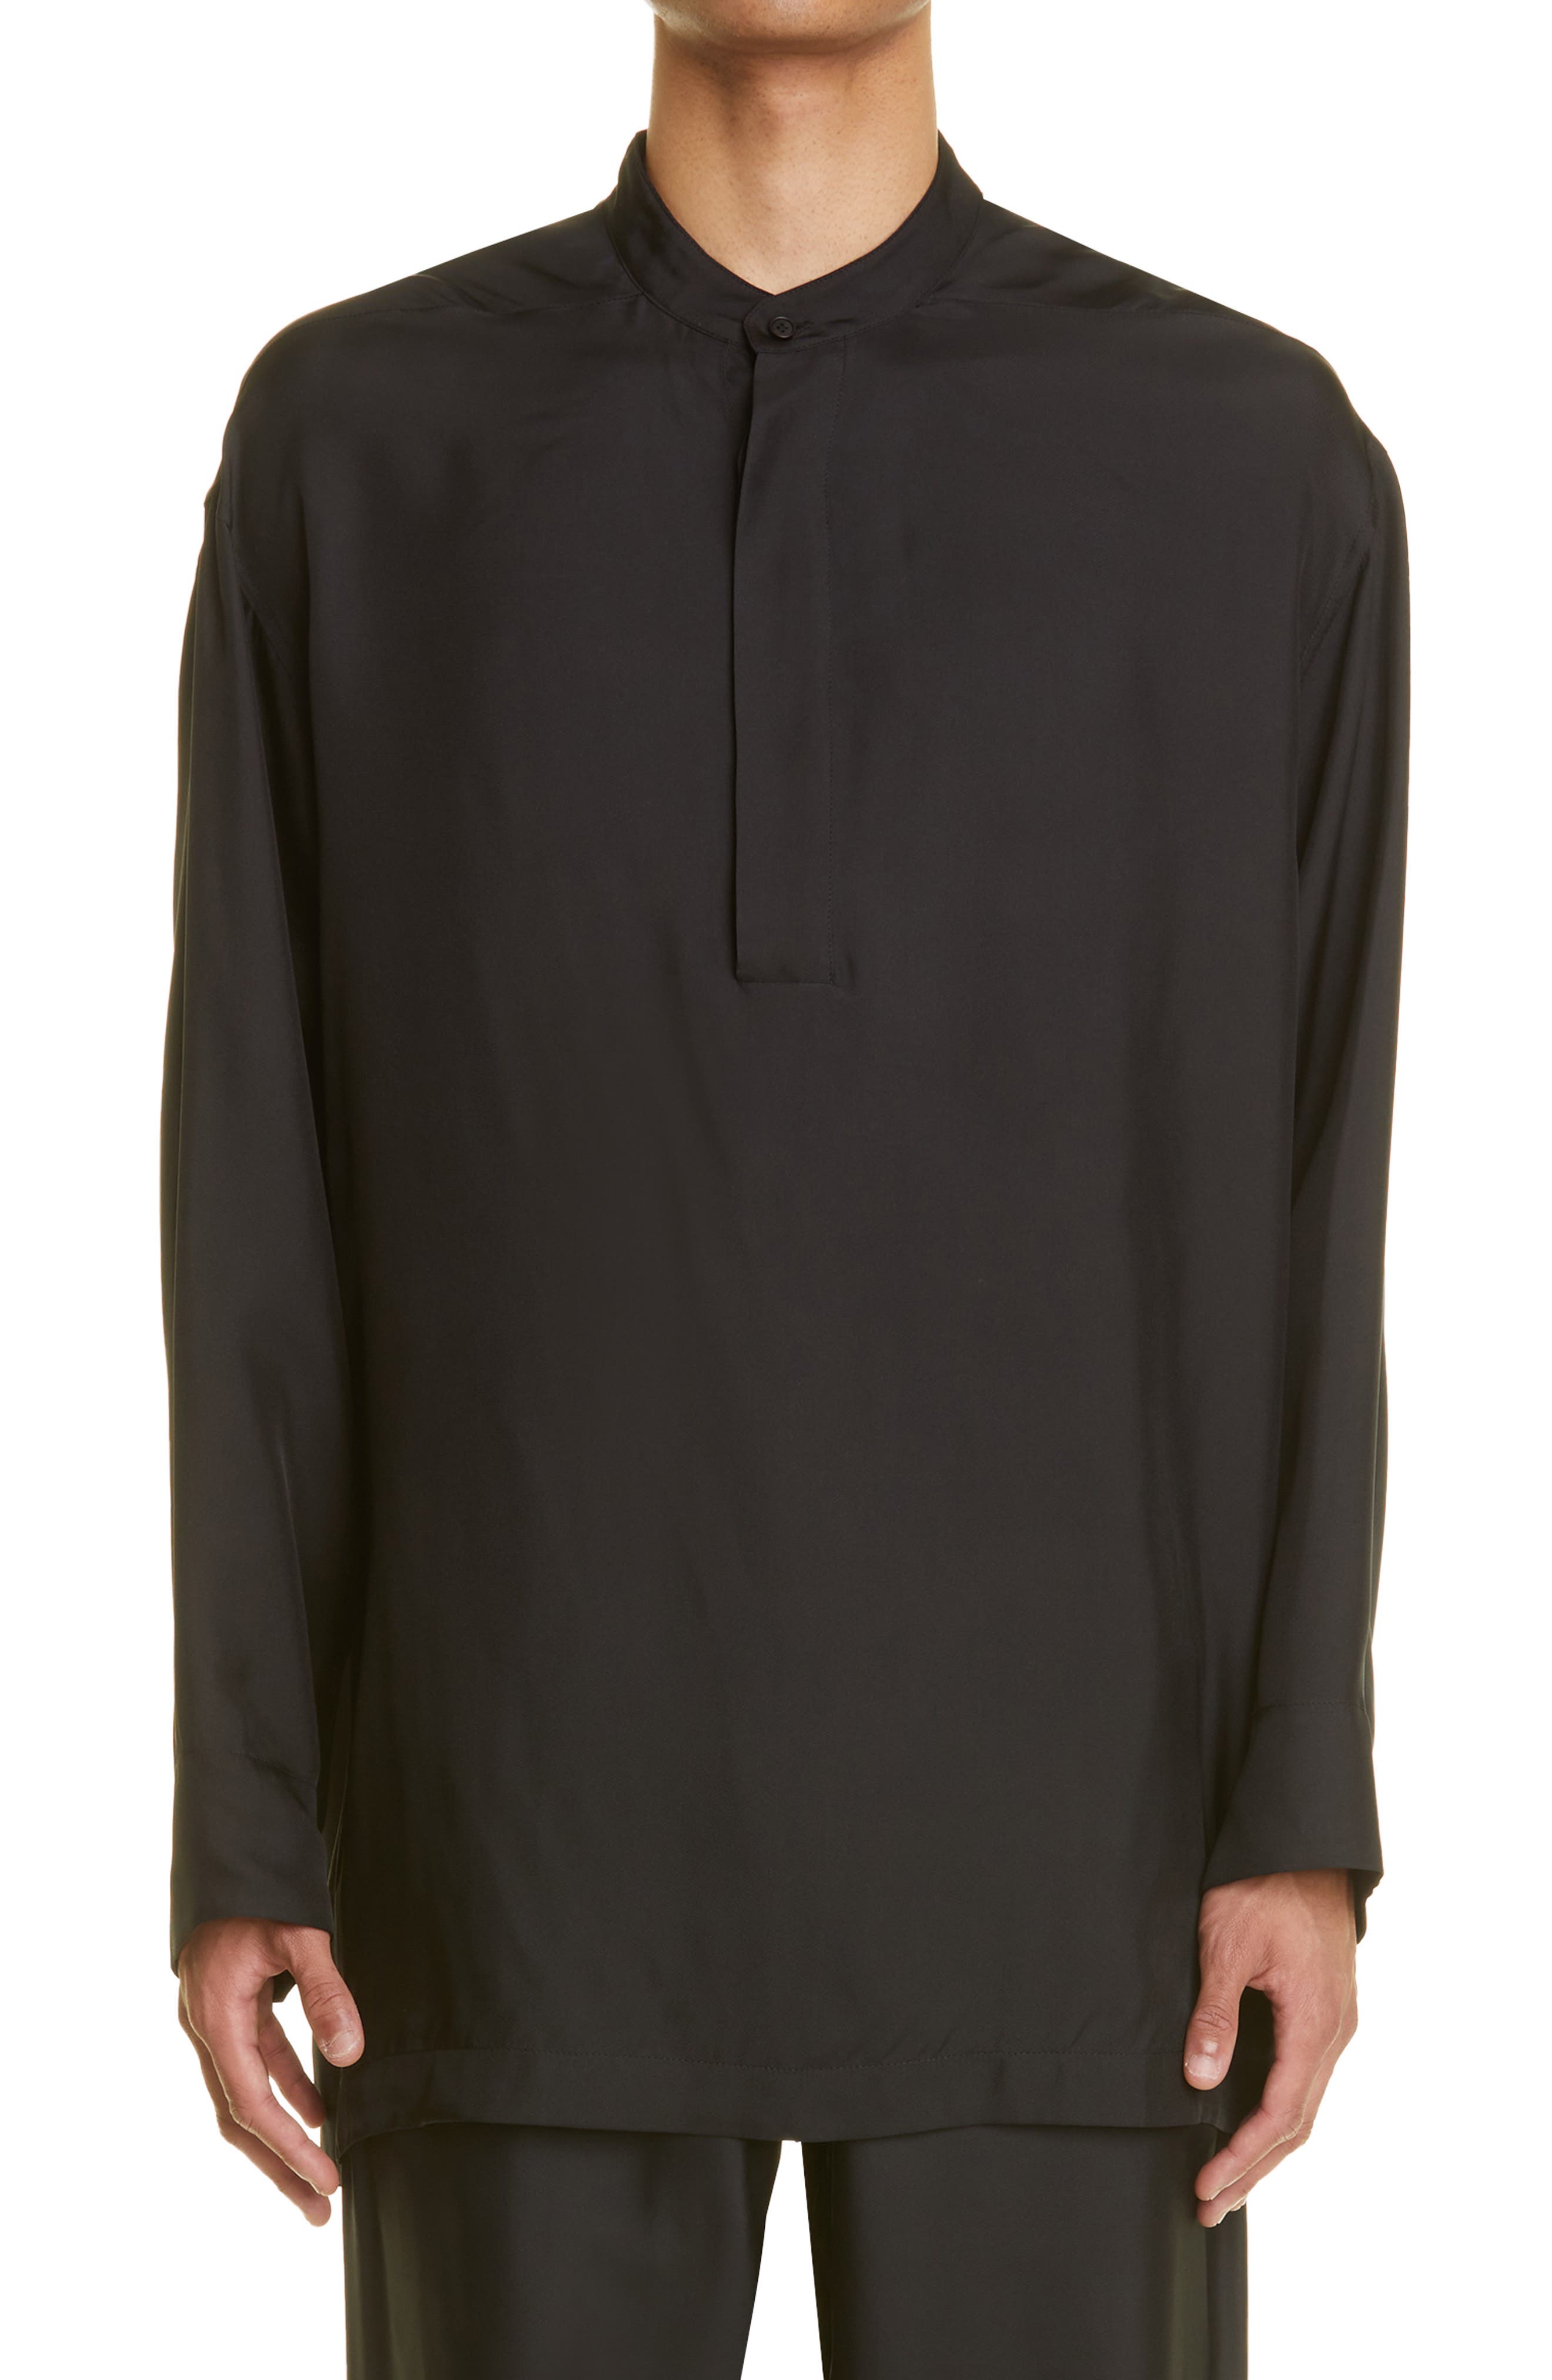 Fear of God Long Sleeve Lounge Shirt in Black at Nordstrom, Size Medium